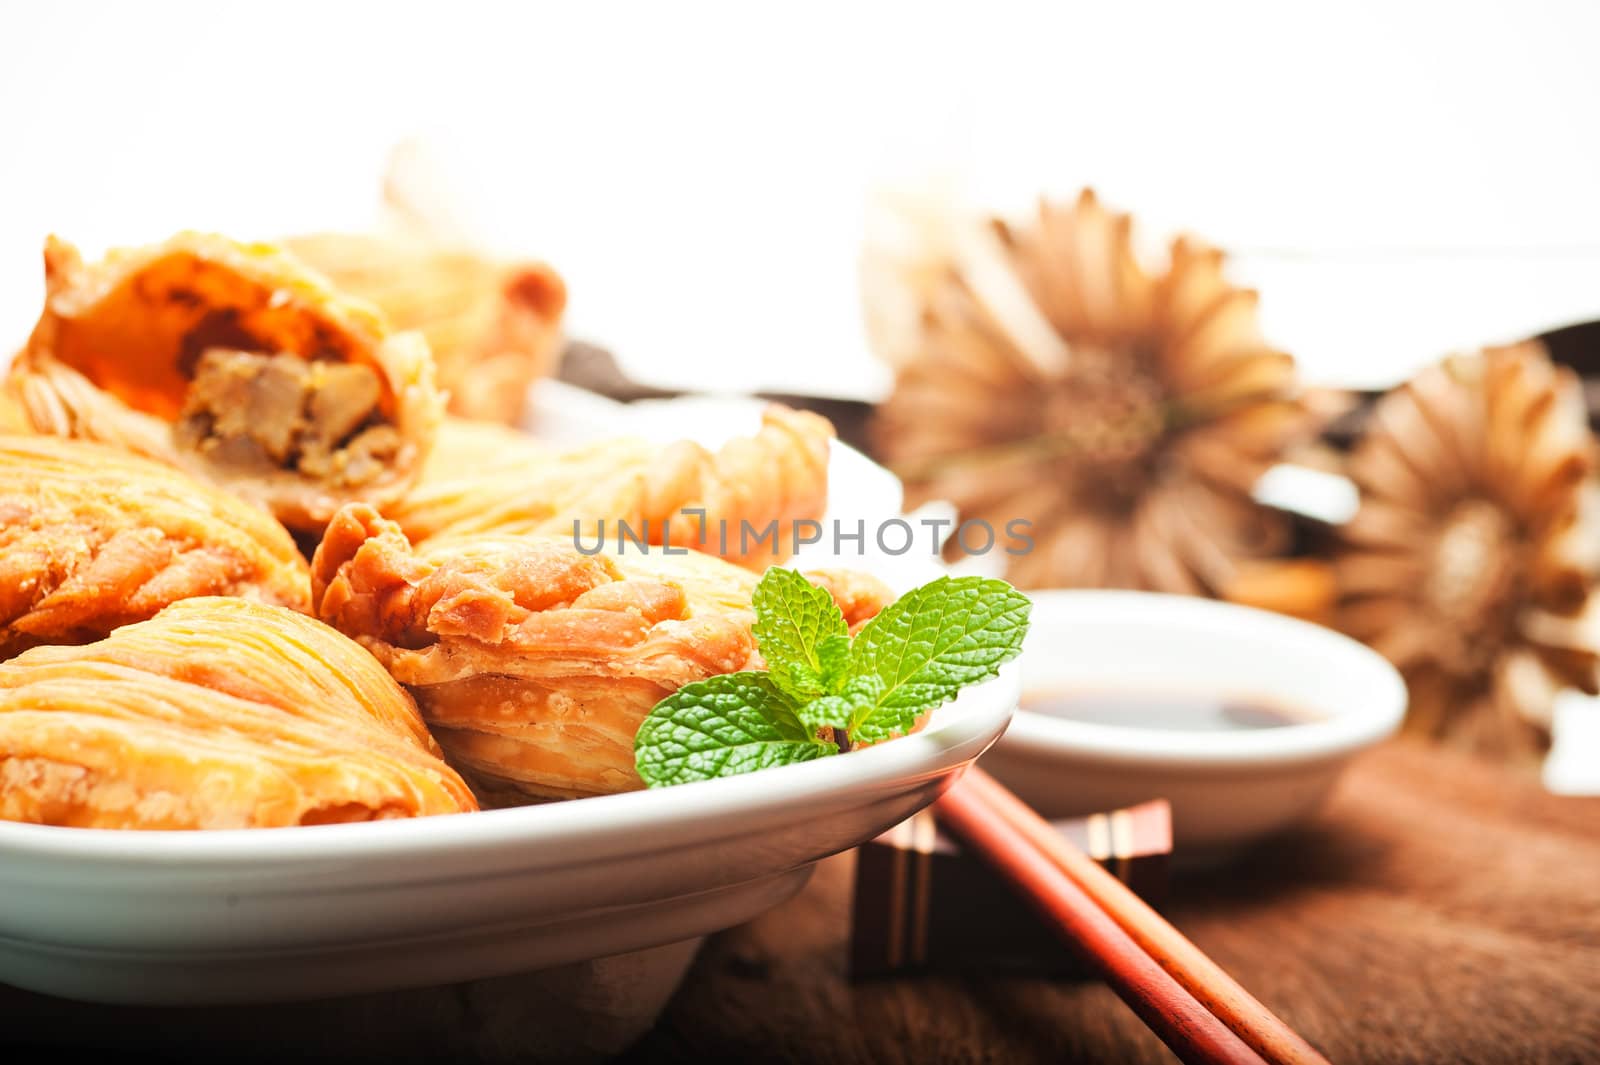 Thai curry puffs there are a speciality of Sarabourie a city of Thailand